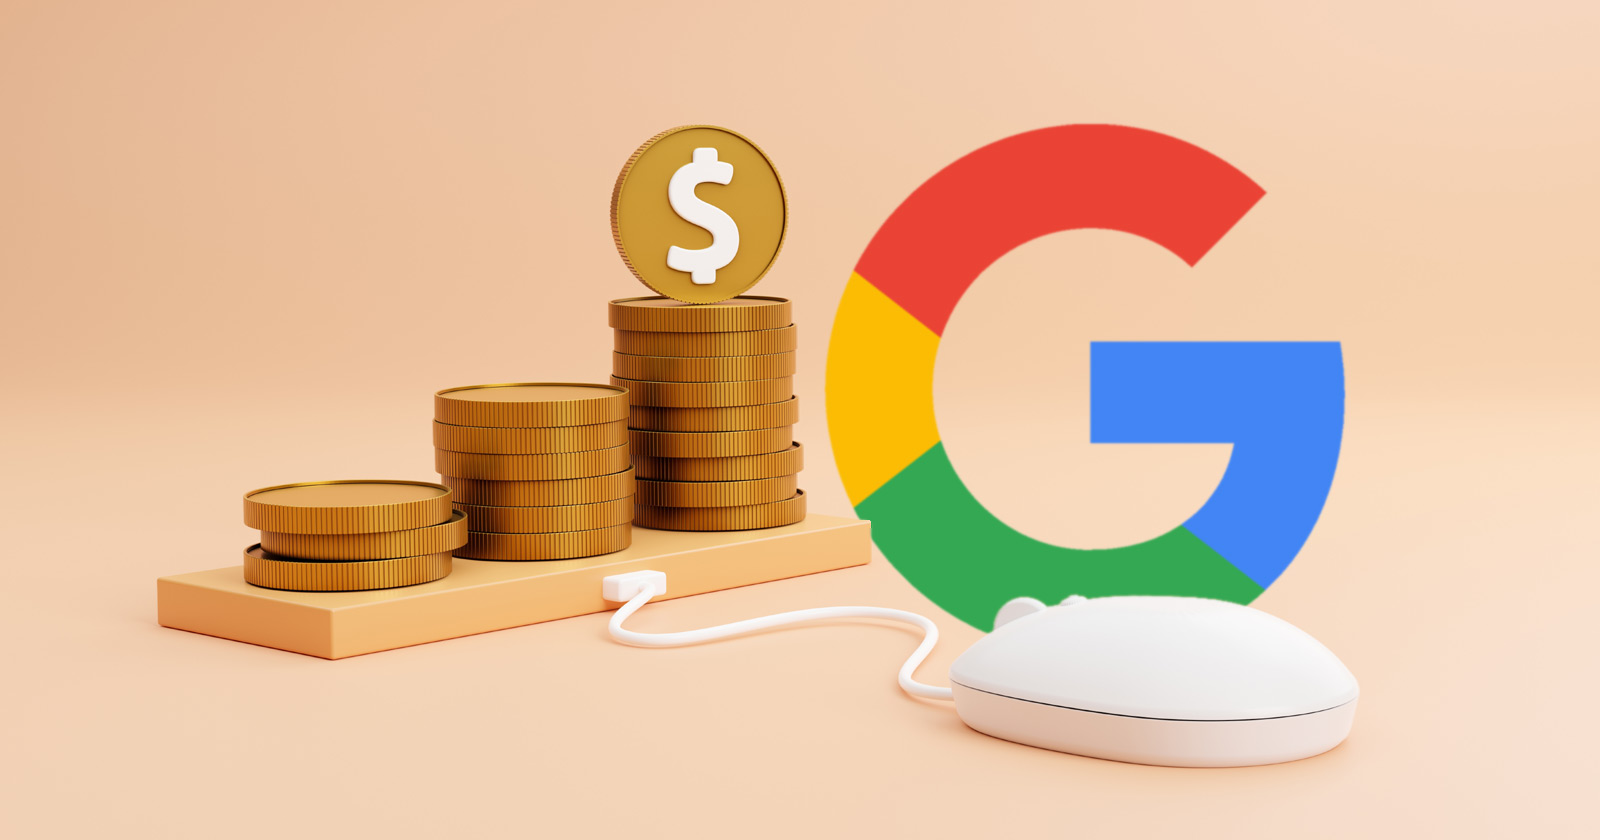 Change in AdSense payment structure to pay per impression